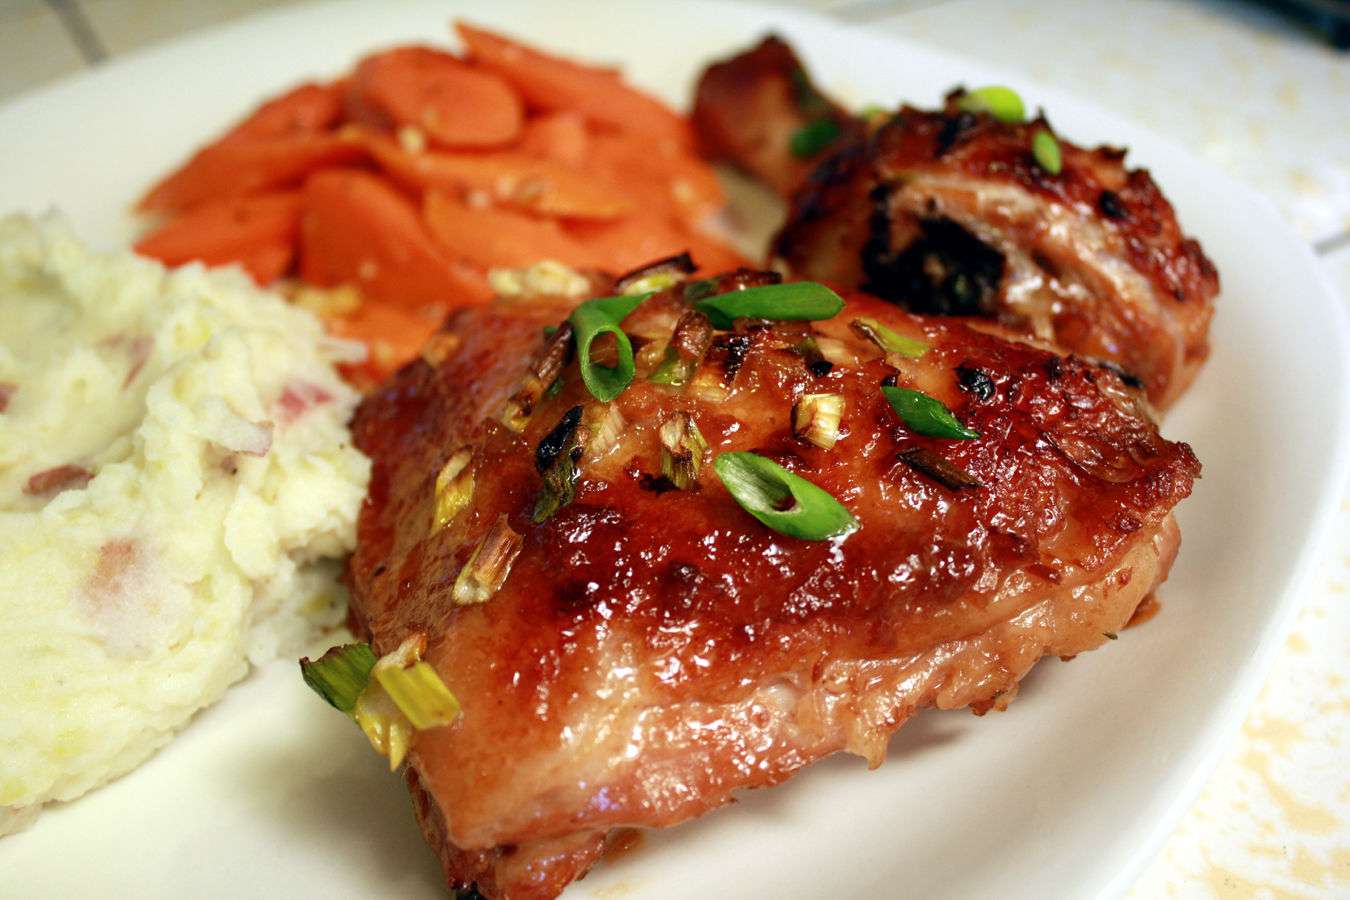 a dinner plate with a sticky-looking baked chicken piece topped with slivered green onions in the foreground, and mashed potatoes and glazed carrots in the background